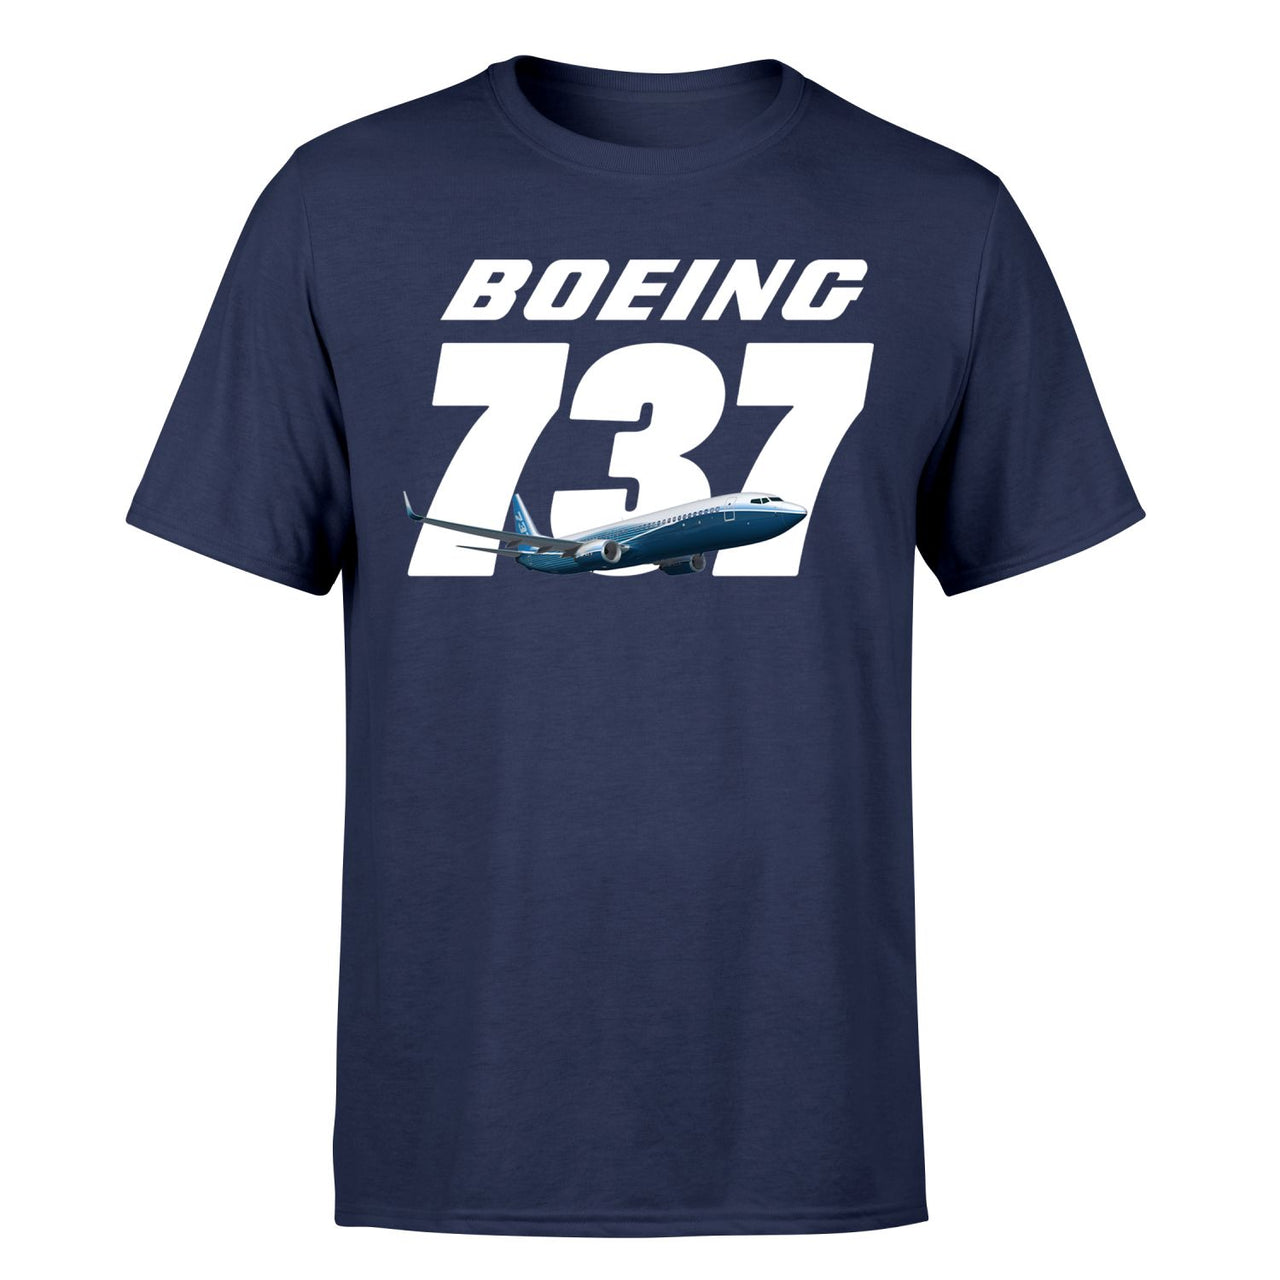 Super Boeing 737+Text Designed T-Shirts